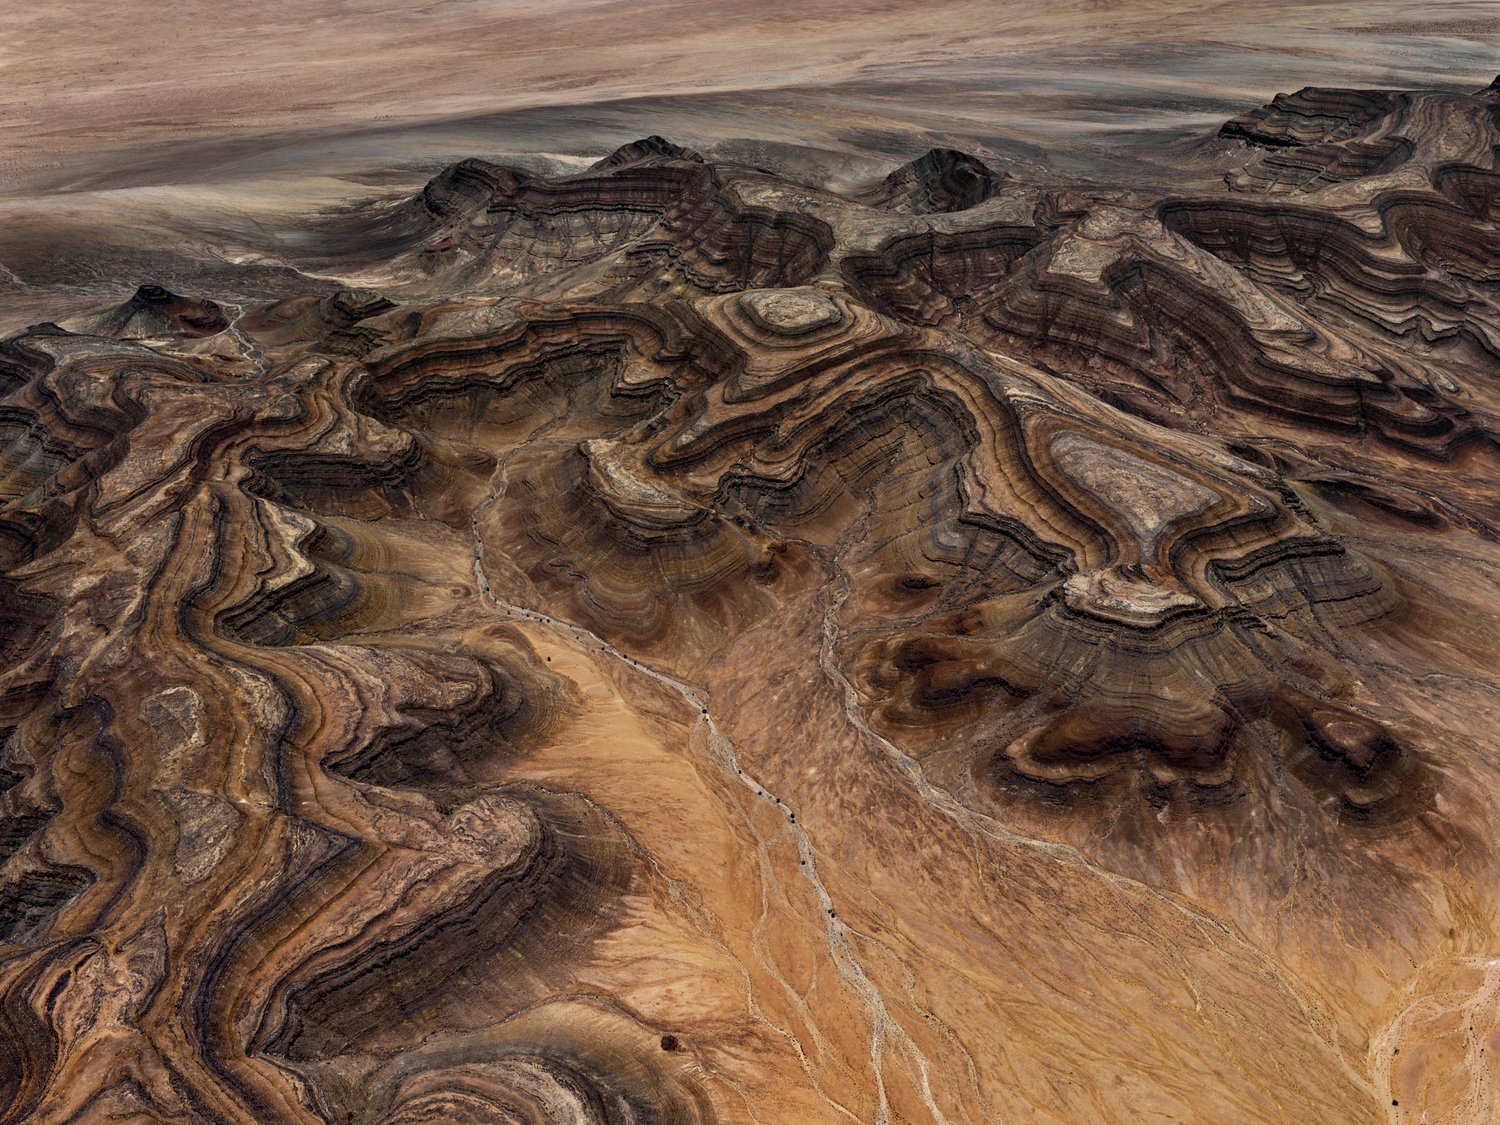 We all participate' – Edward Burtynsky on photographing the epic